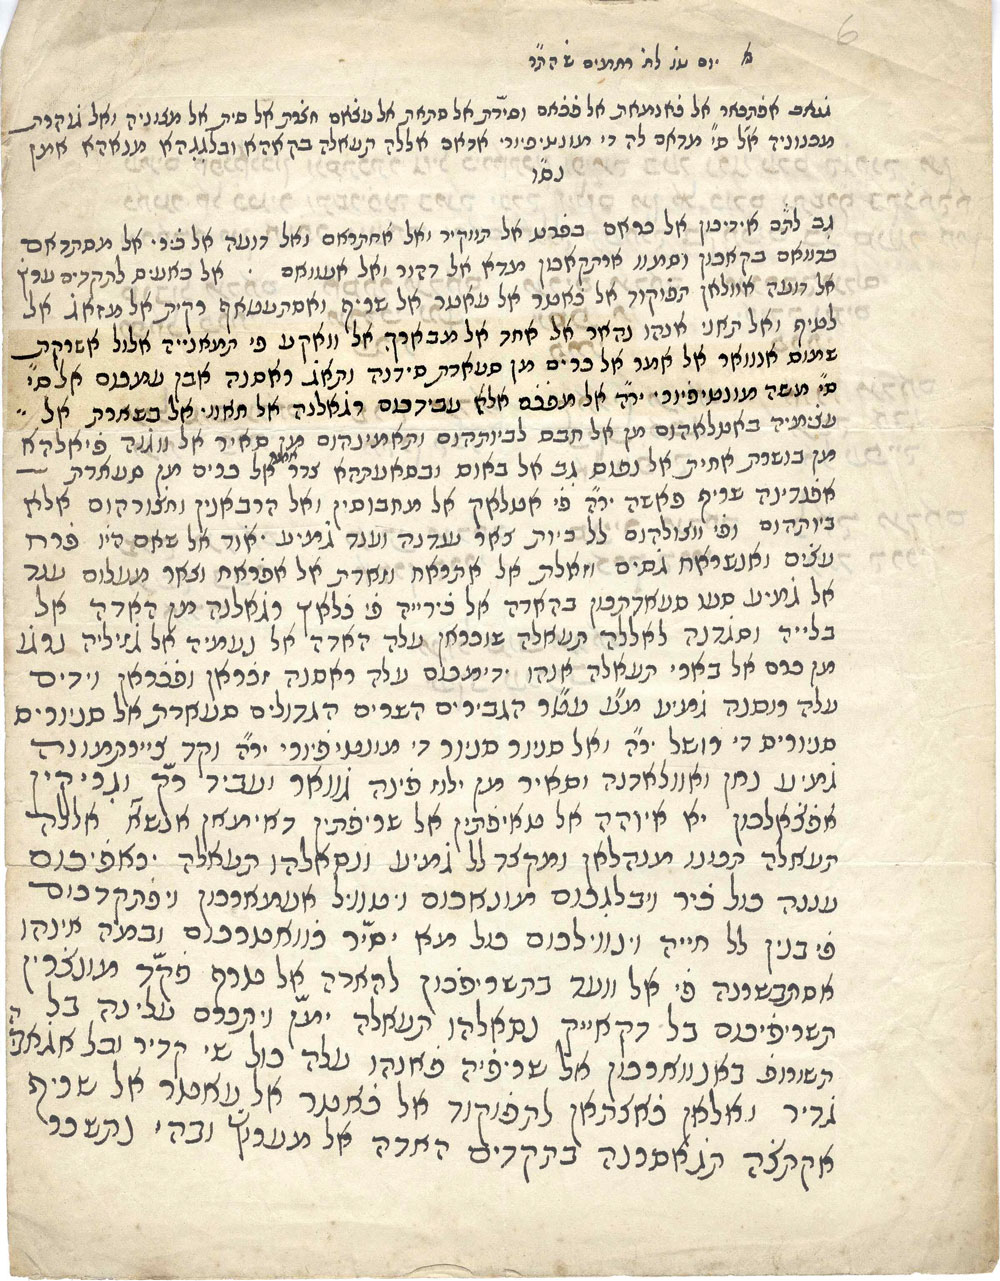 With thanks from Damascus. The letter addressed to Lady Montefiore by the wives of the accused Jews after their release